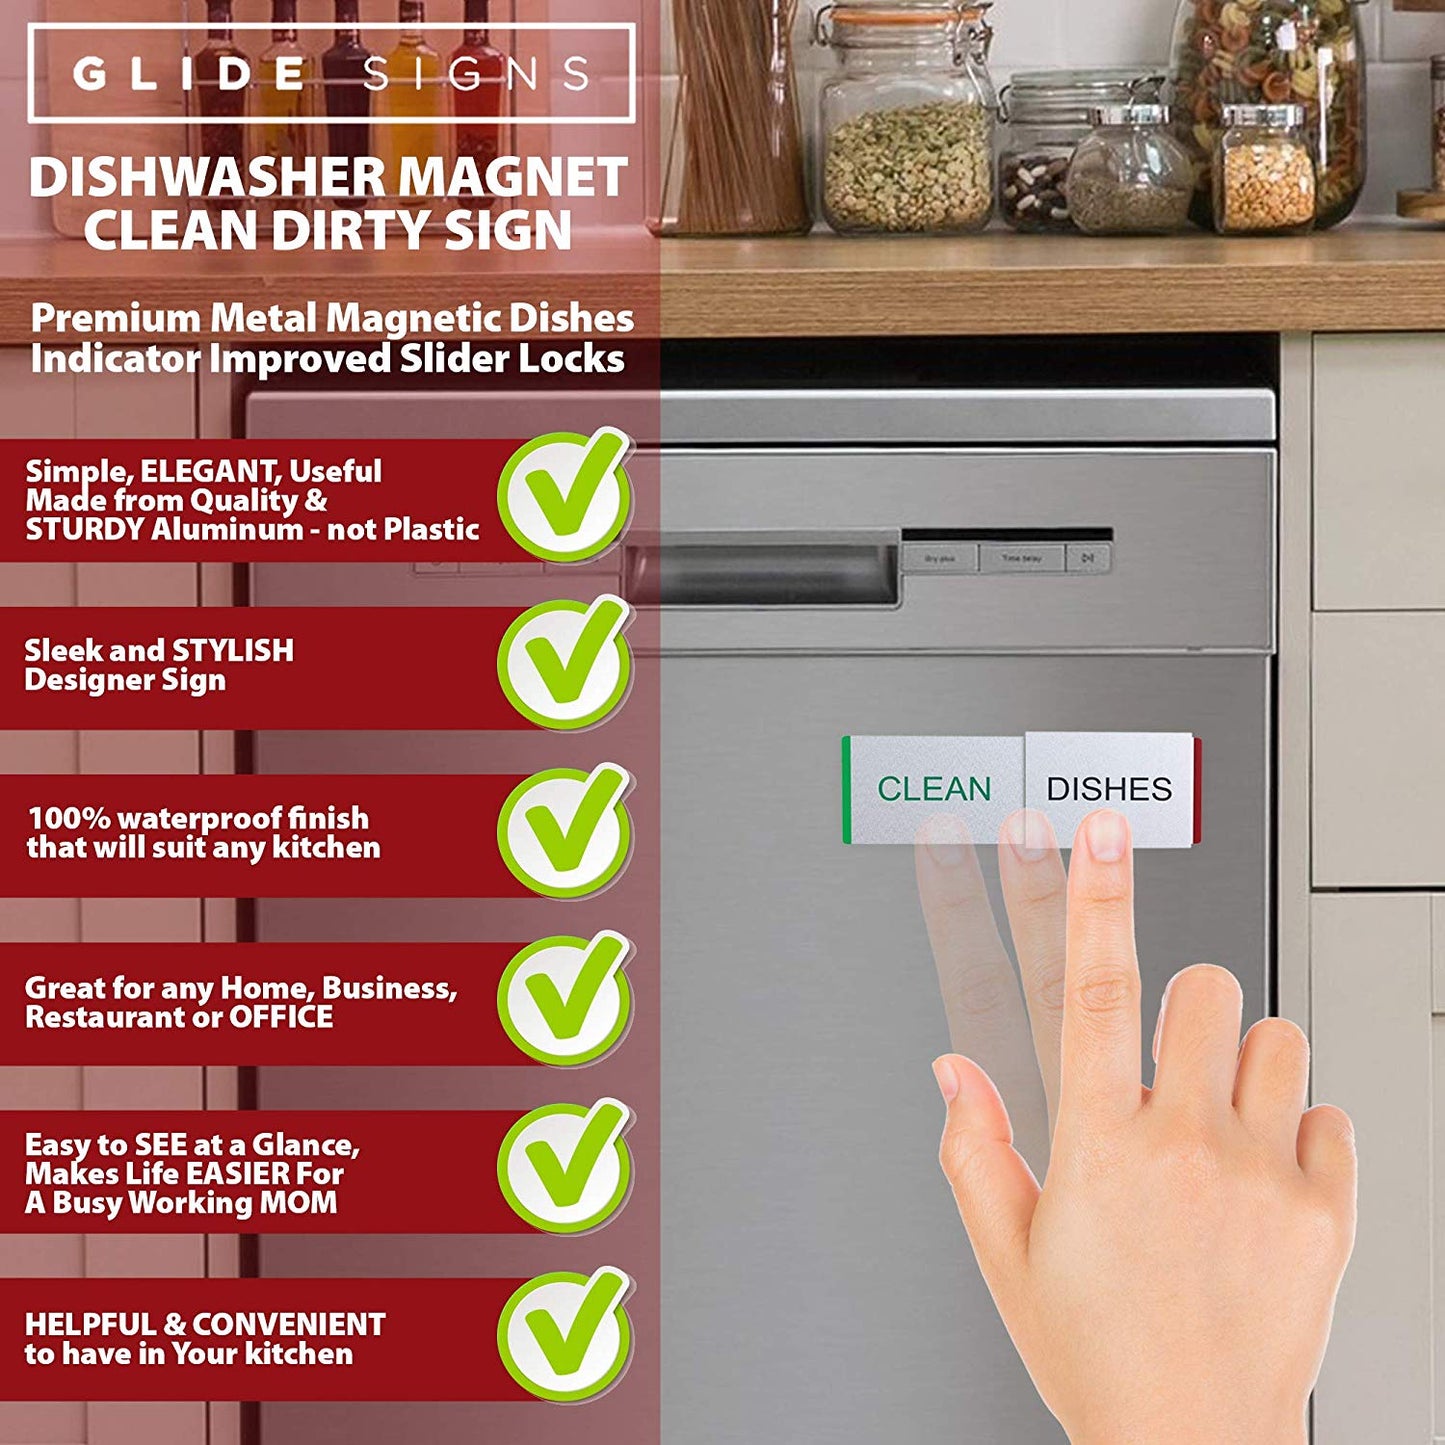 Clean or Dirty Dishwasher Magnet - oddgifts.com